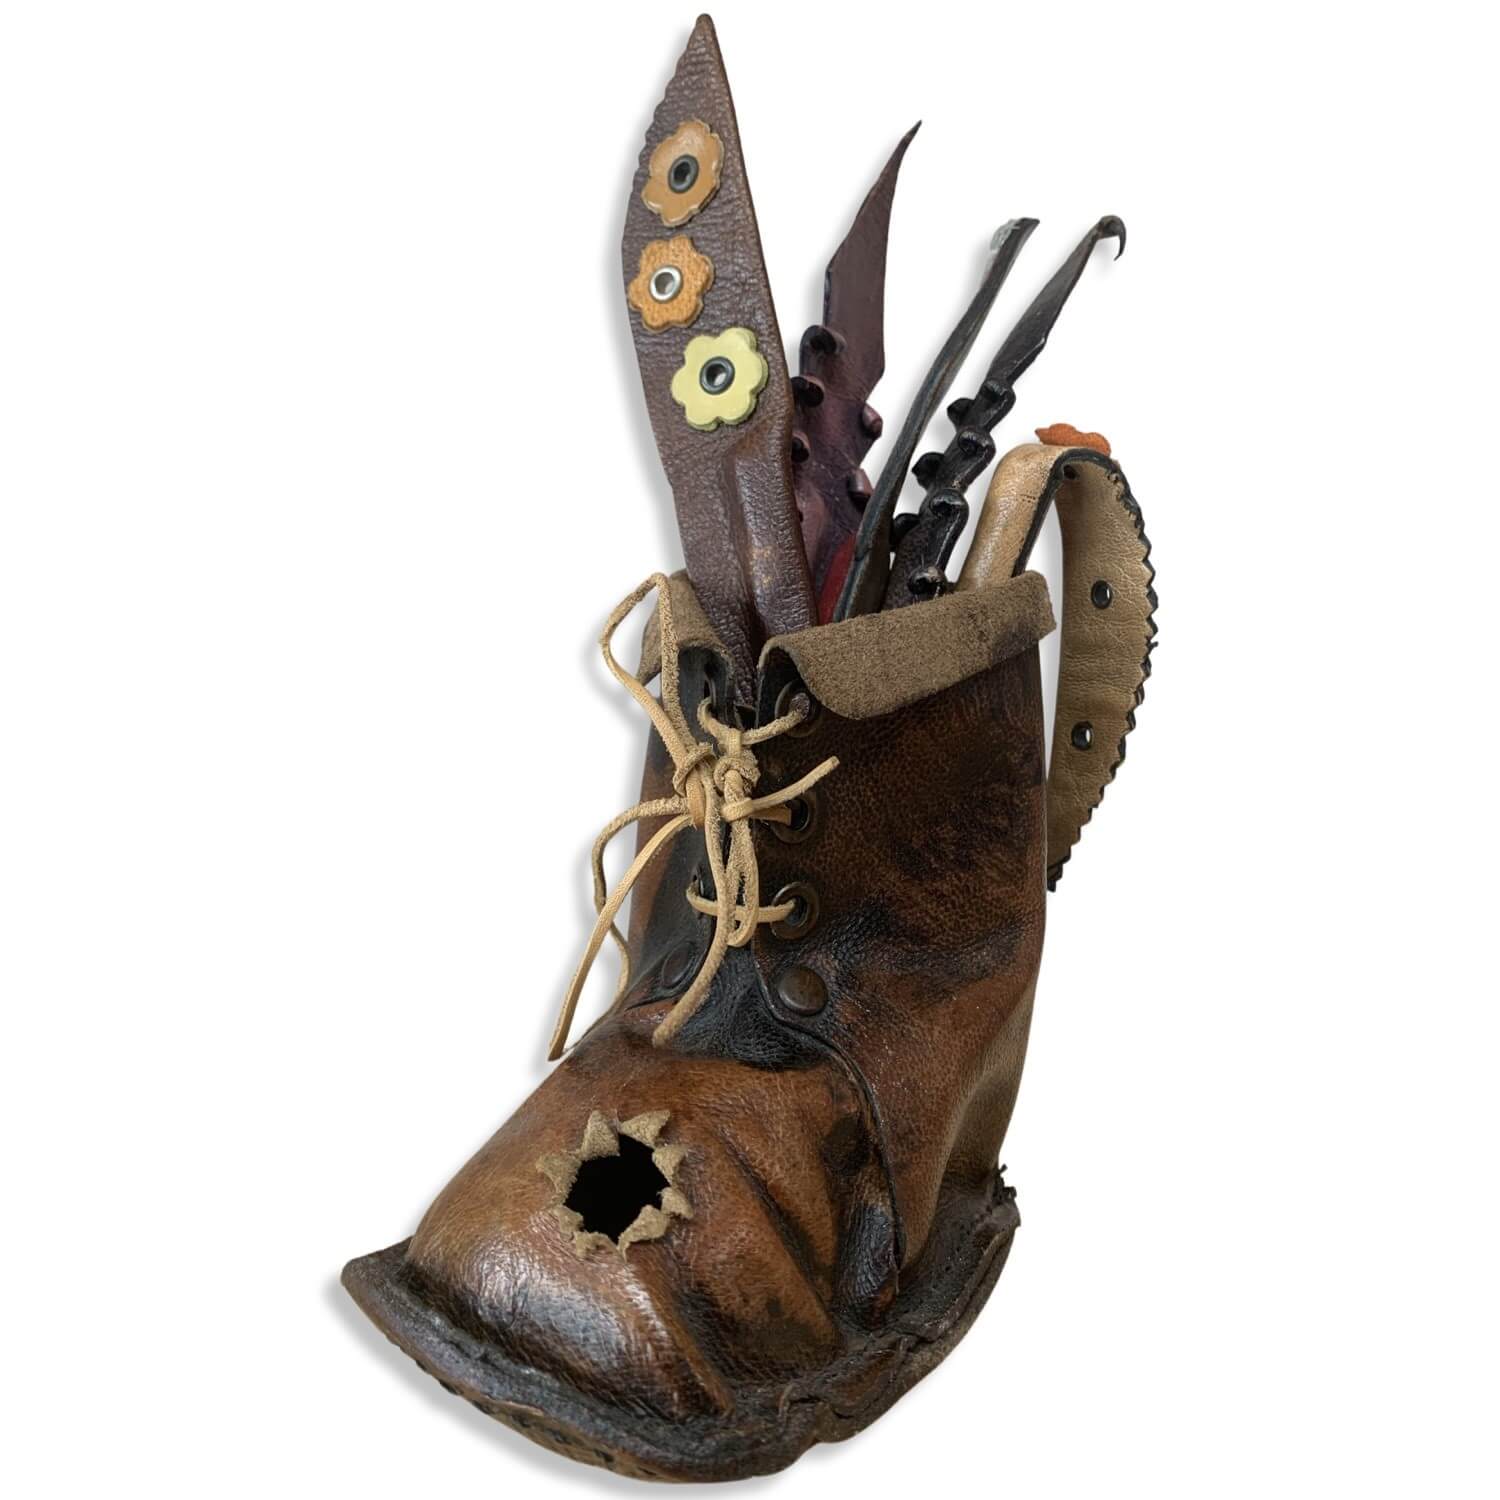 Leather Pen Holder - Soldier Boot With Bullet Hole